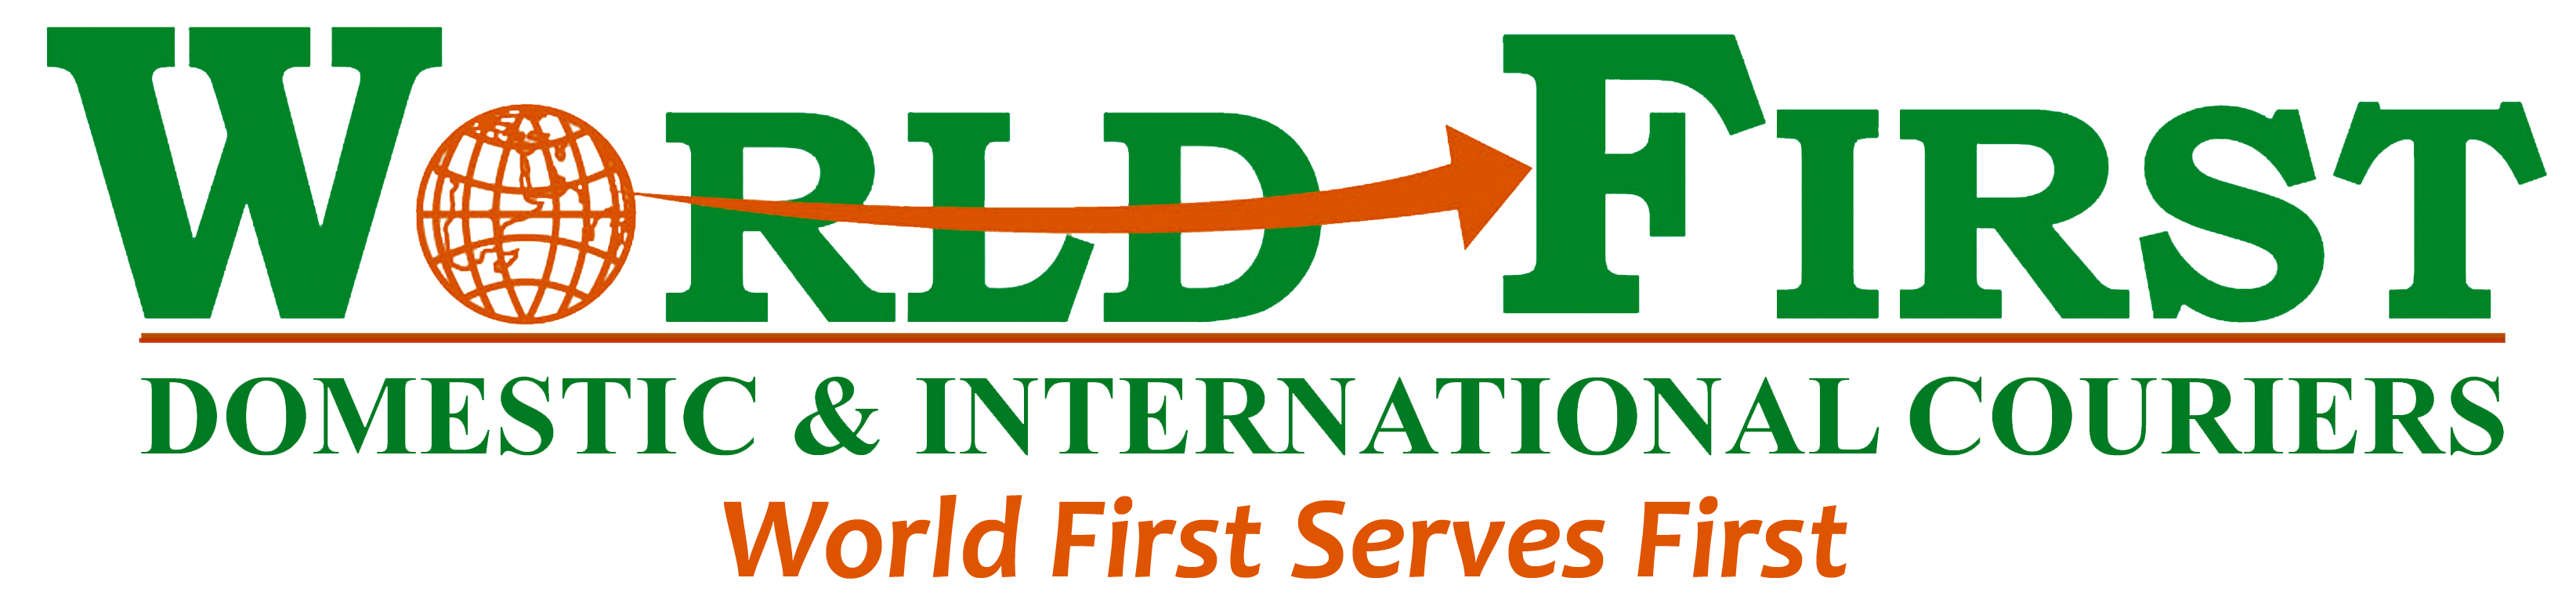 World First International Couriers|Legal Services|Professional Services